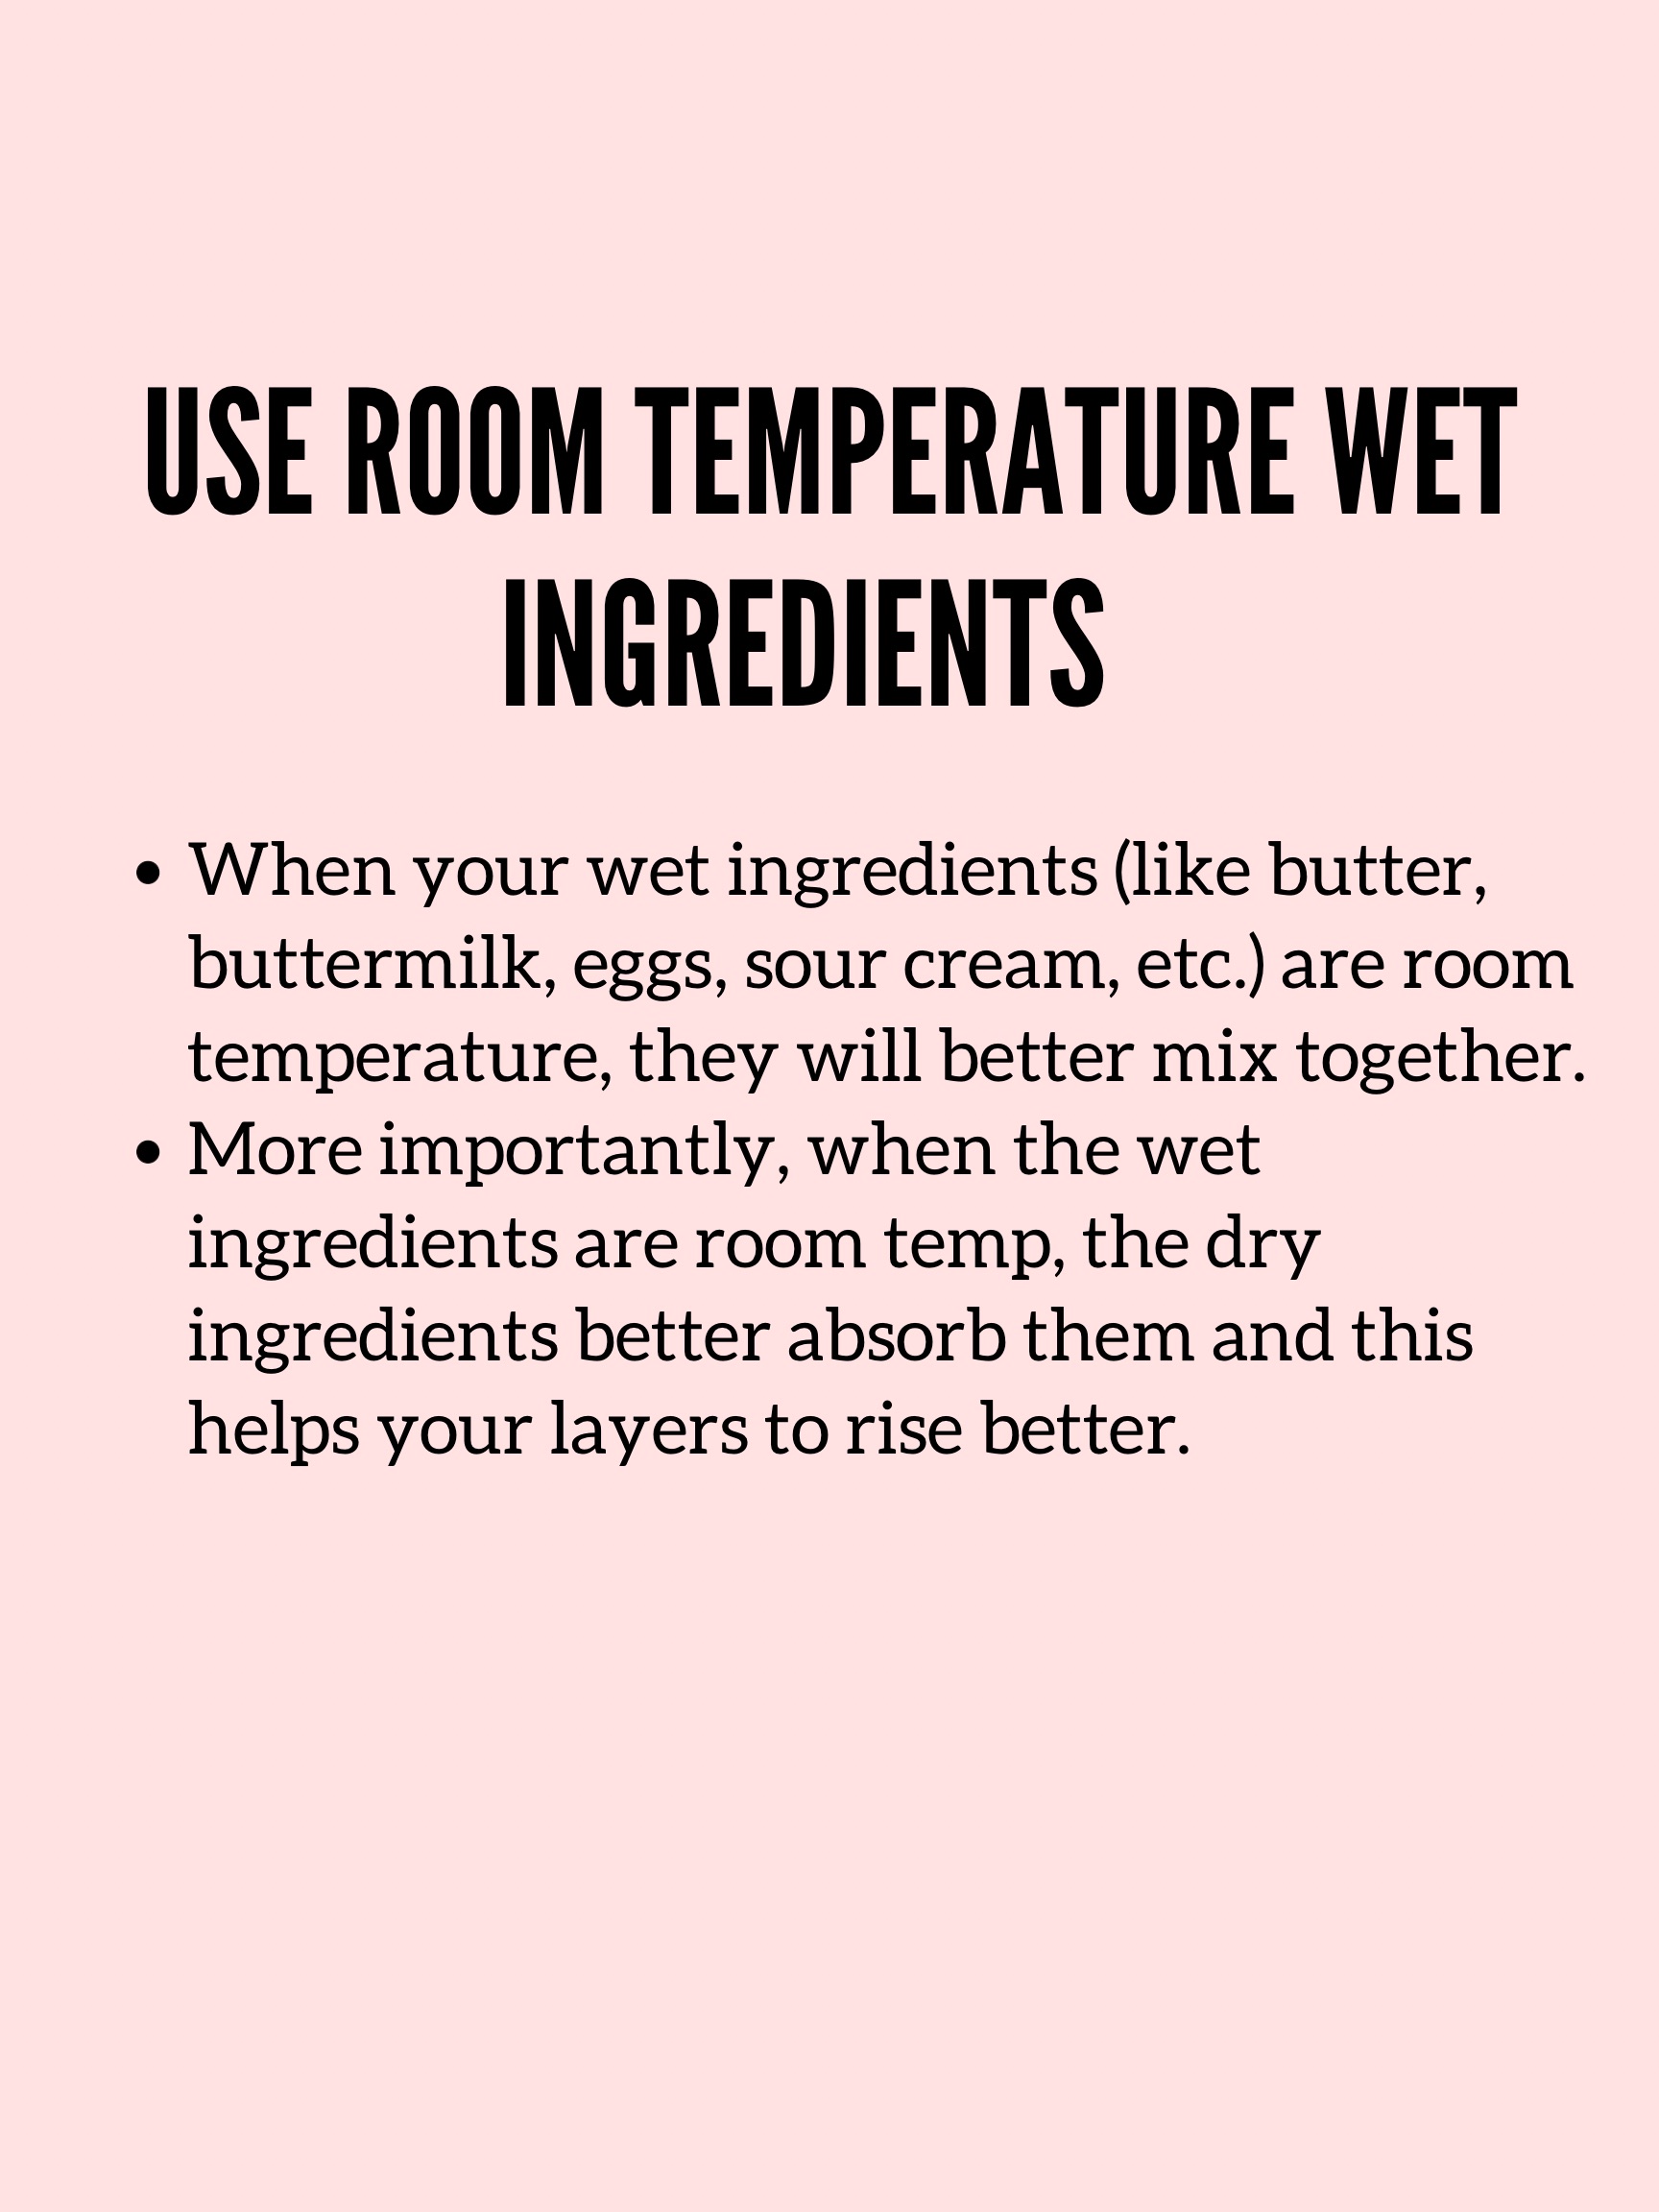 Use room temperature ingredients to make sure your cakes rise well.